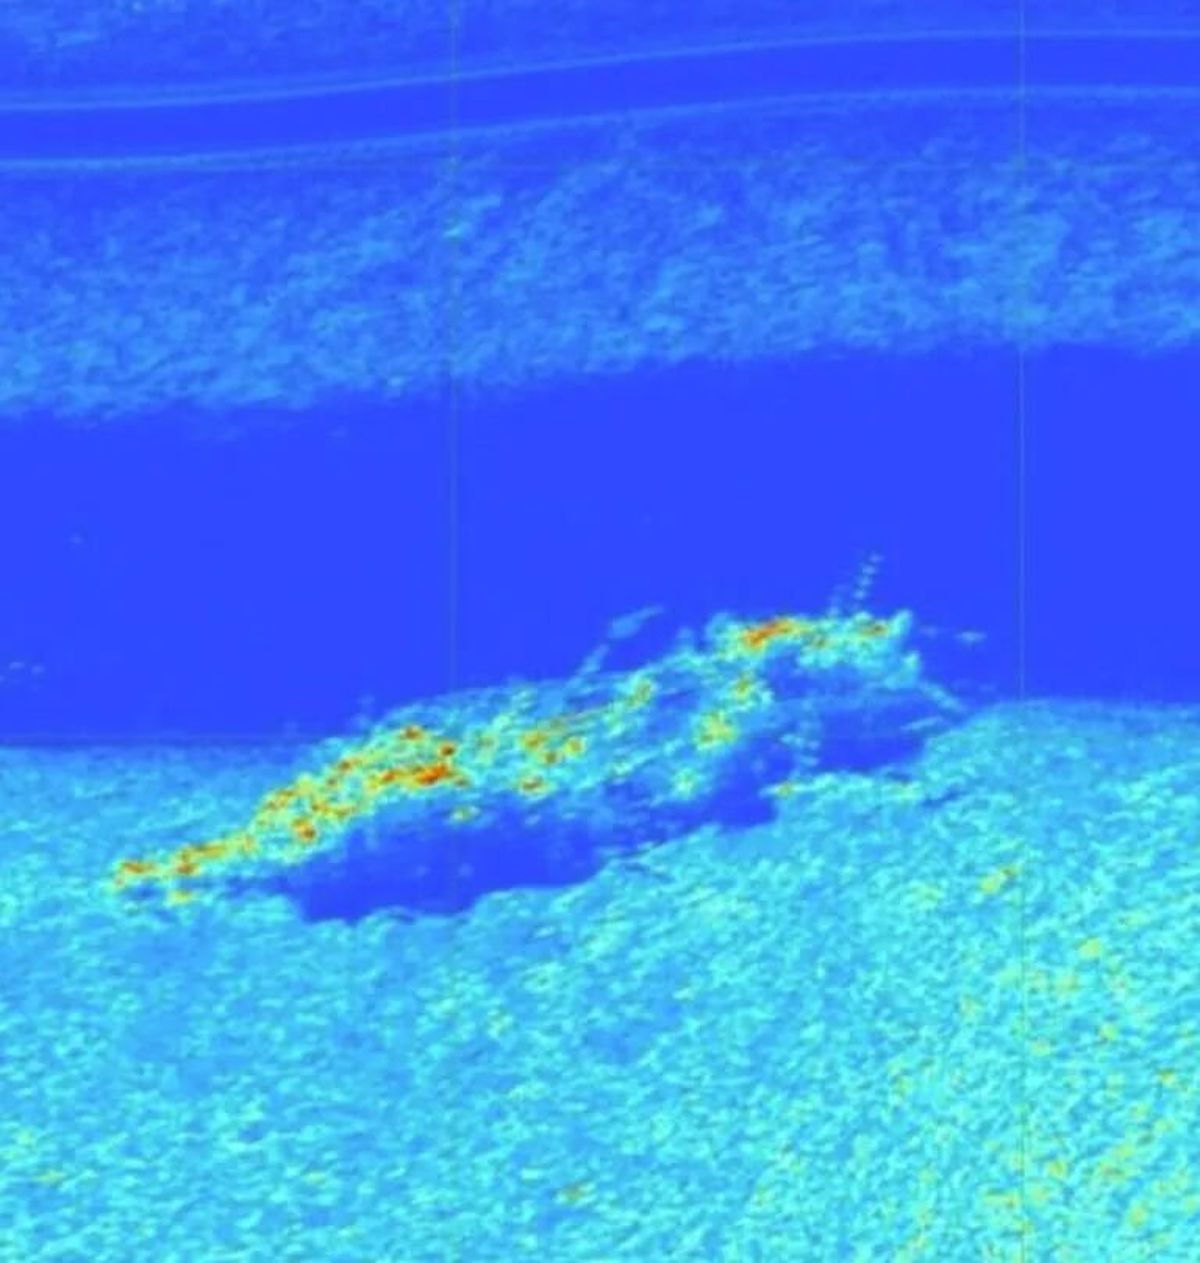 An image of the floatplane wreckage on the seafloor taken Saturday by the University of Washington’s vessel using side-scan sonar.  (Courtesy of UW Applied Physics Laboratory)